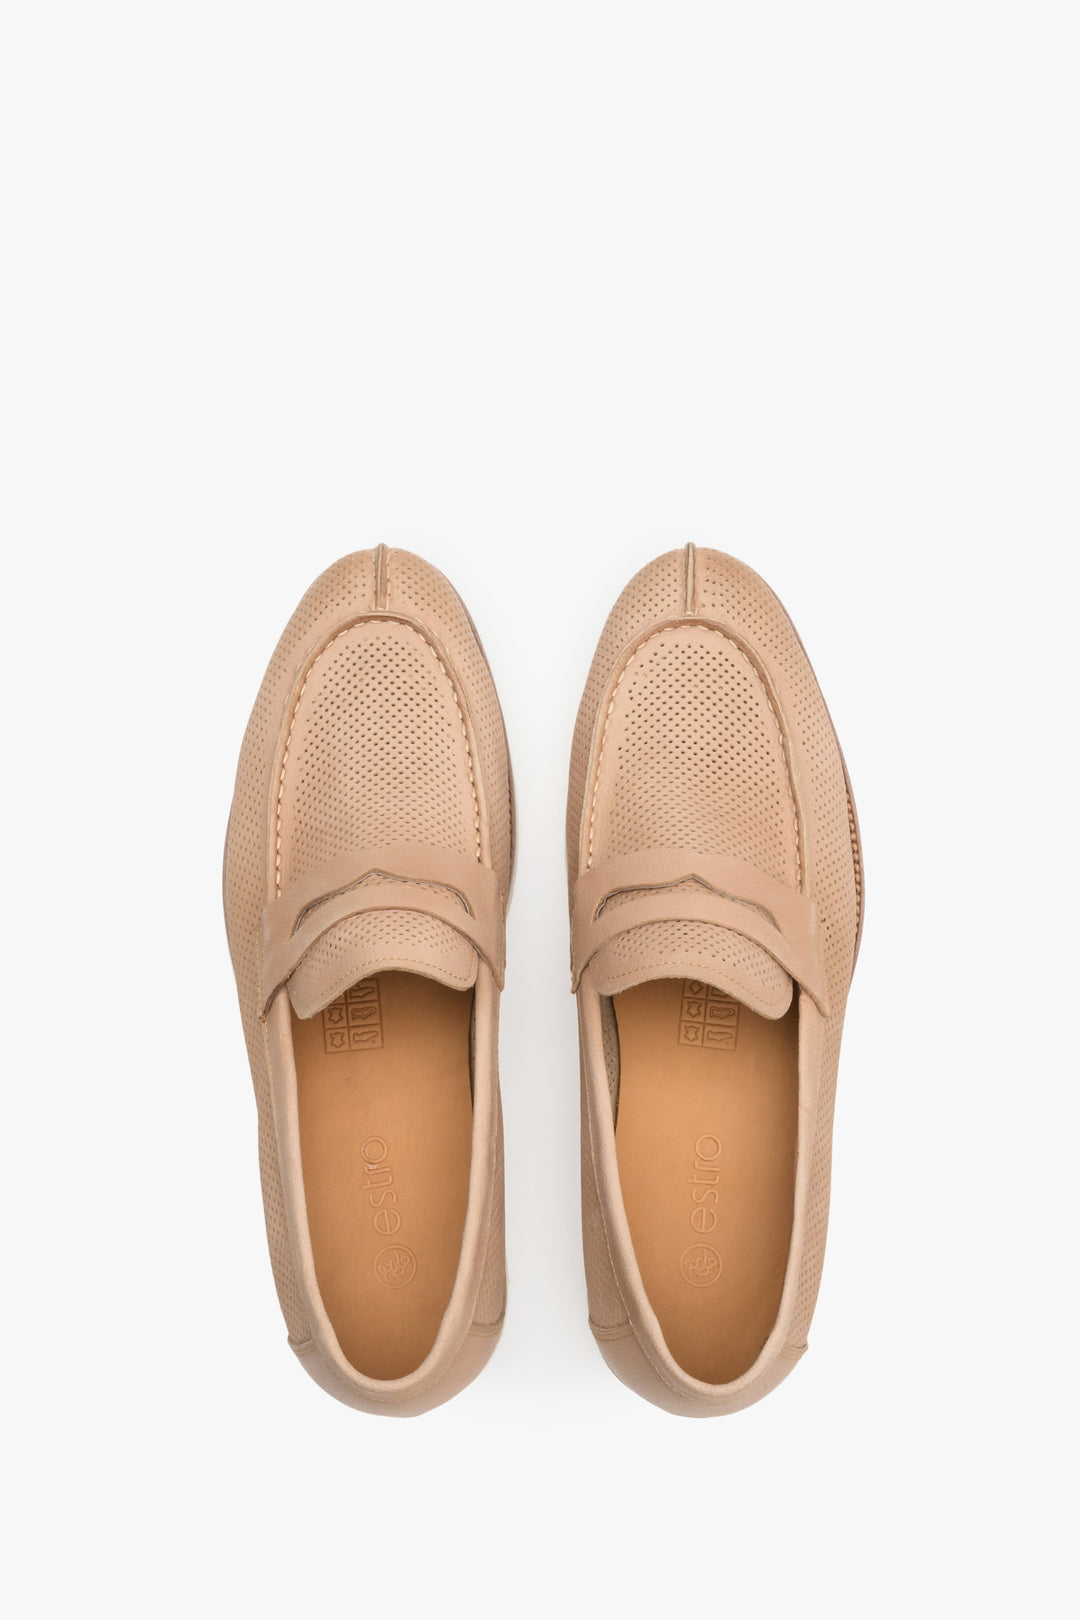 Stylish men's penny loafers made of beige genuine nubuck - presentation from above.